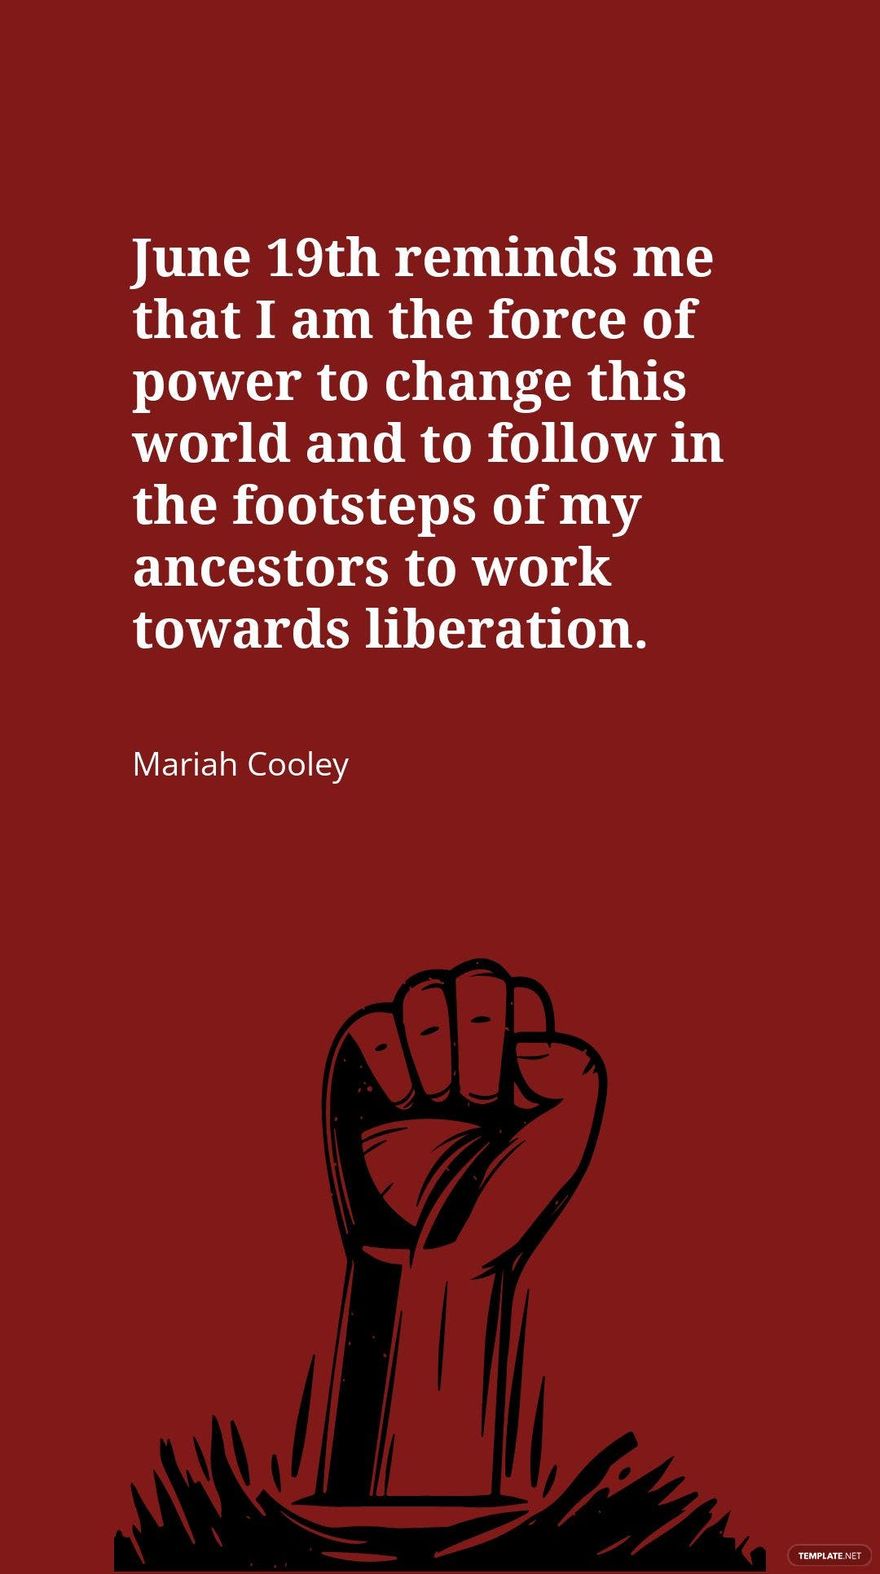 Mariah Cooley - June 19th reminds me that I am the force of power to change this world and to follow in the footsteps of my ancestors to work towards liberation. in JPG